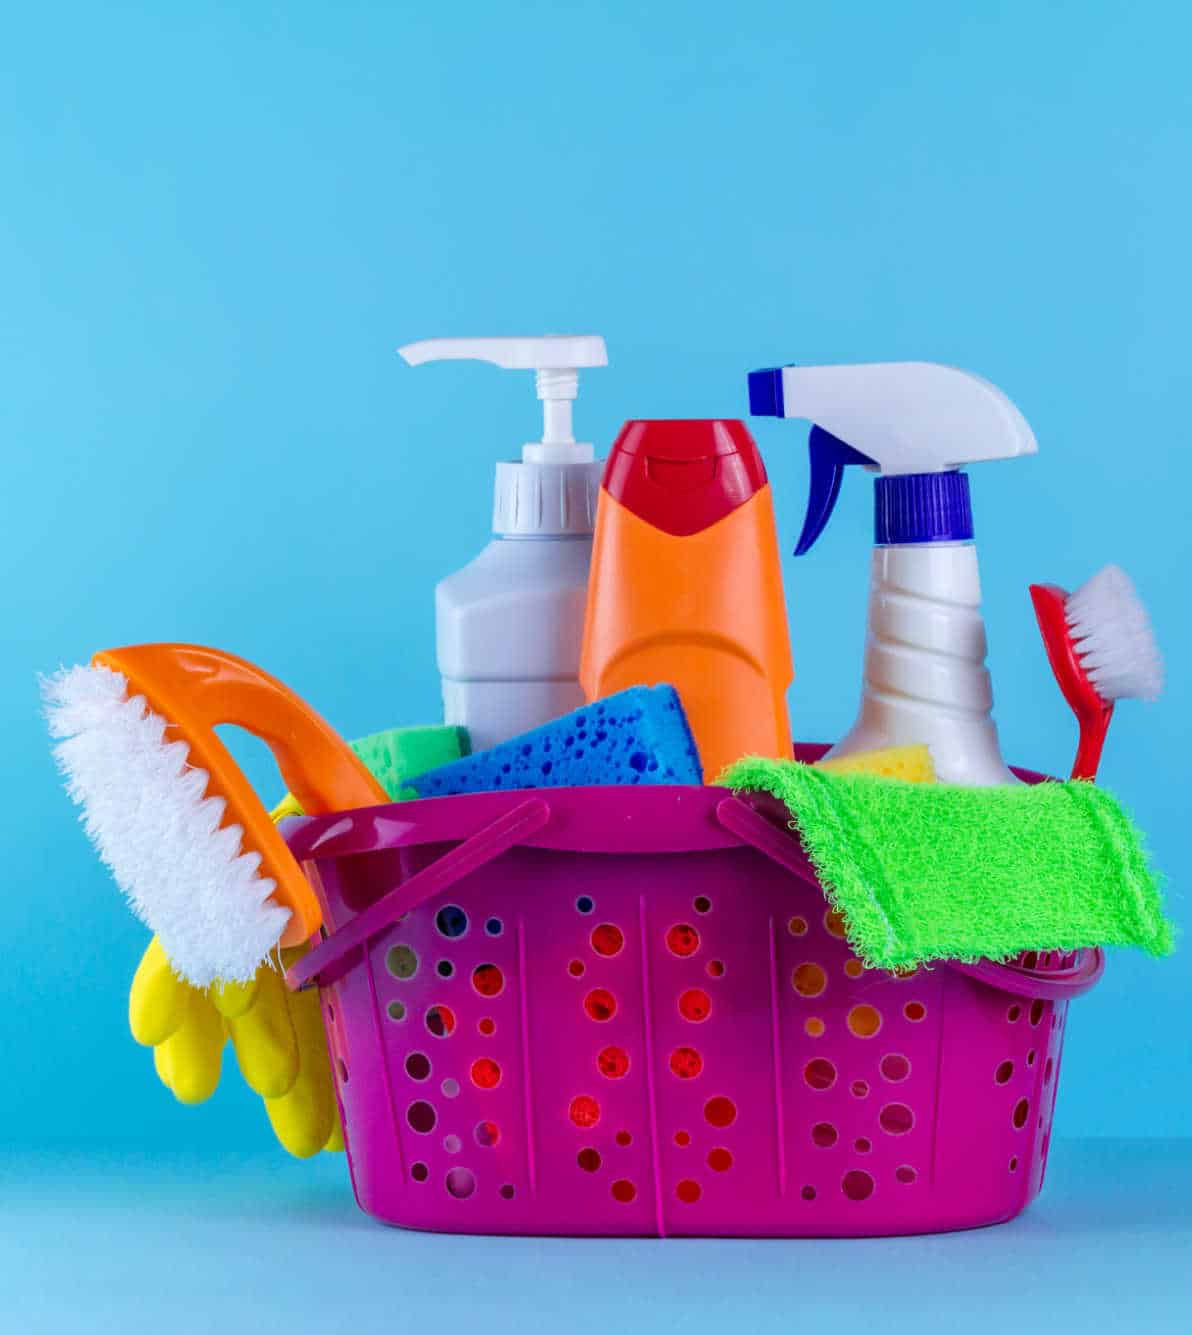 products-cleaning-house-basket